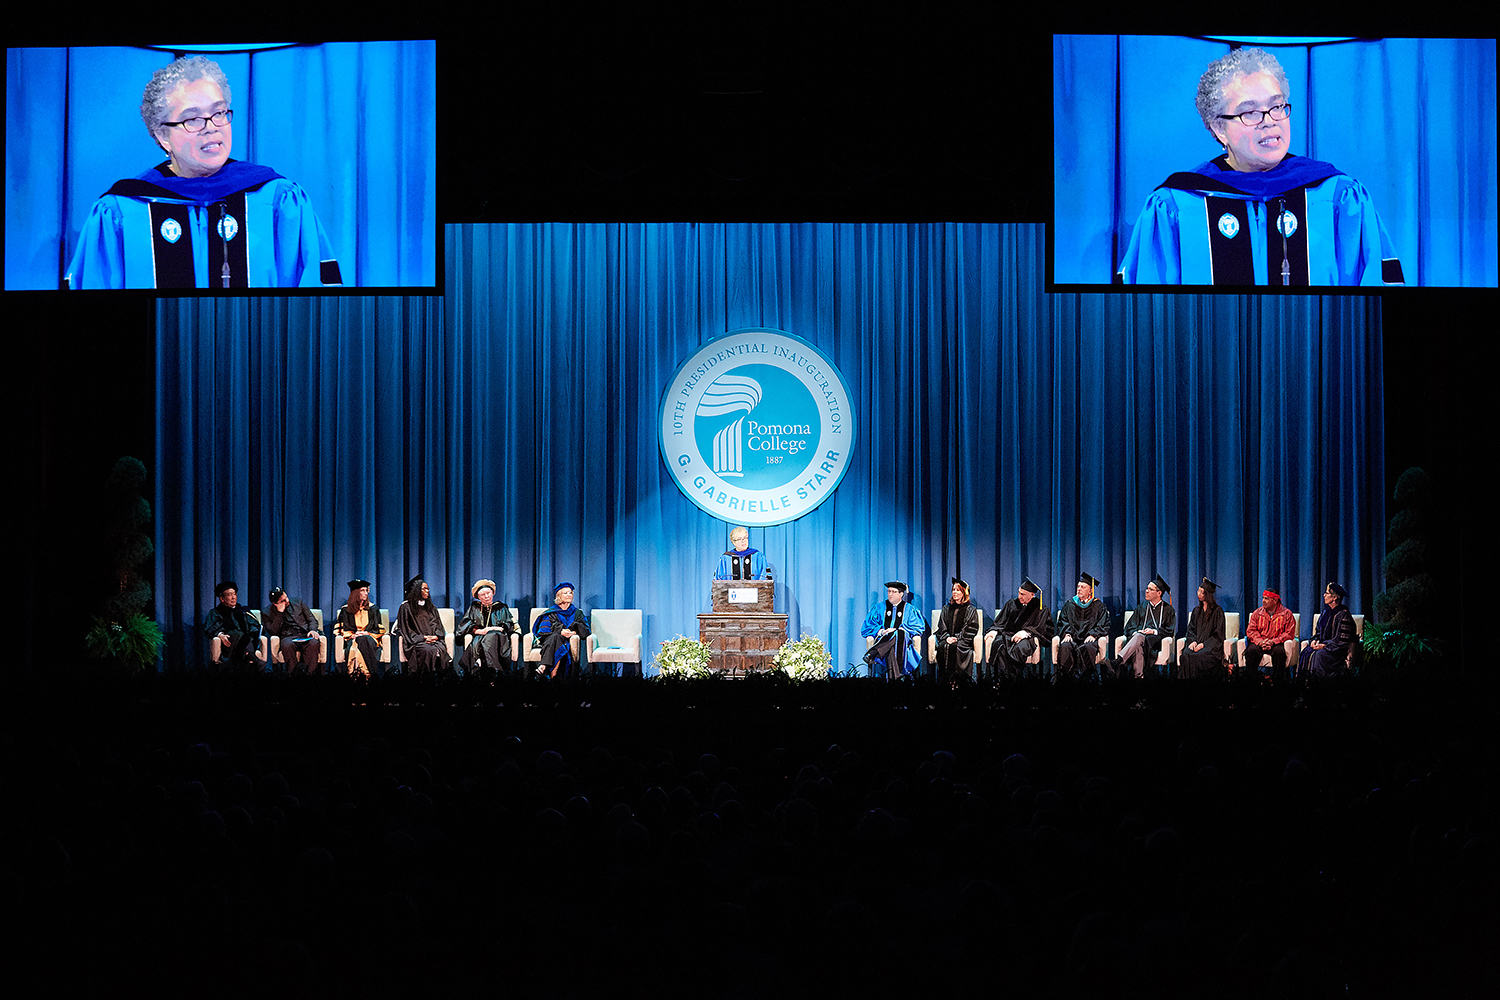 Inauguration of President G. Gabrielle Starr, October 14, 2017